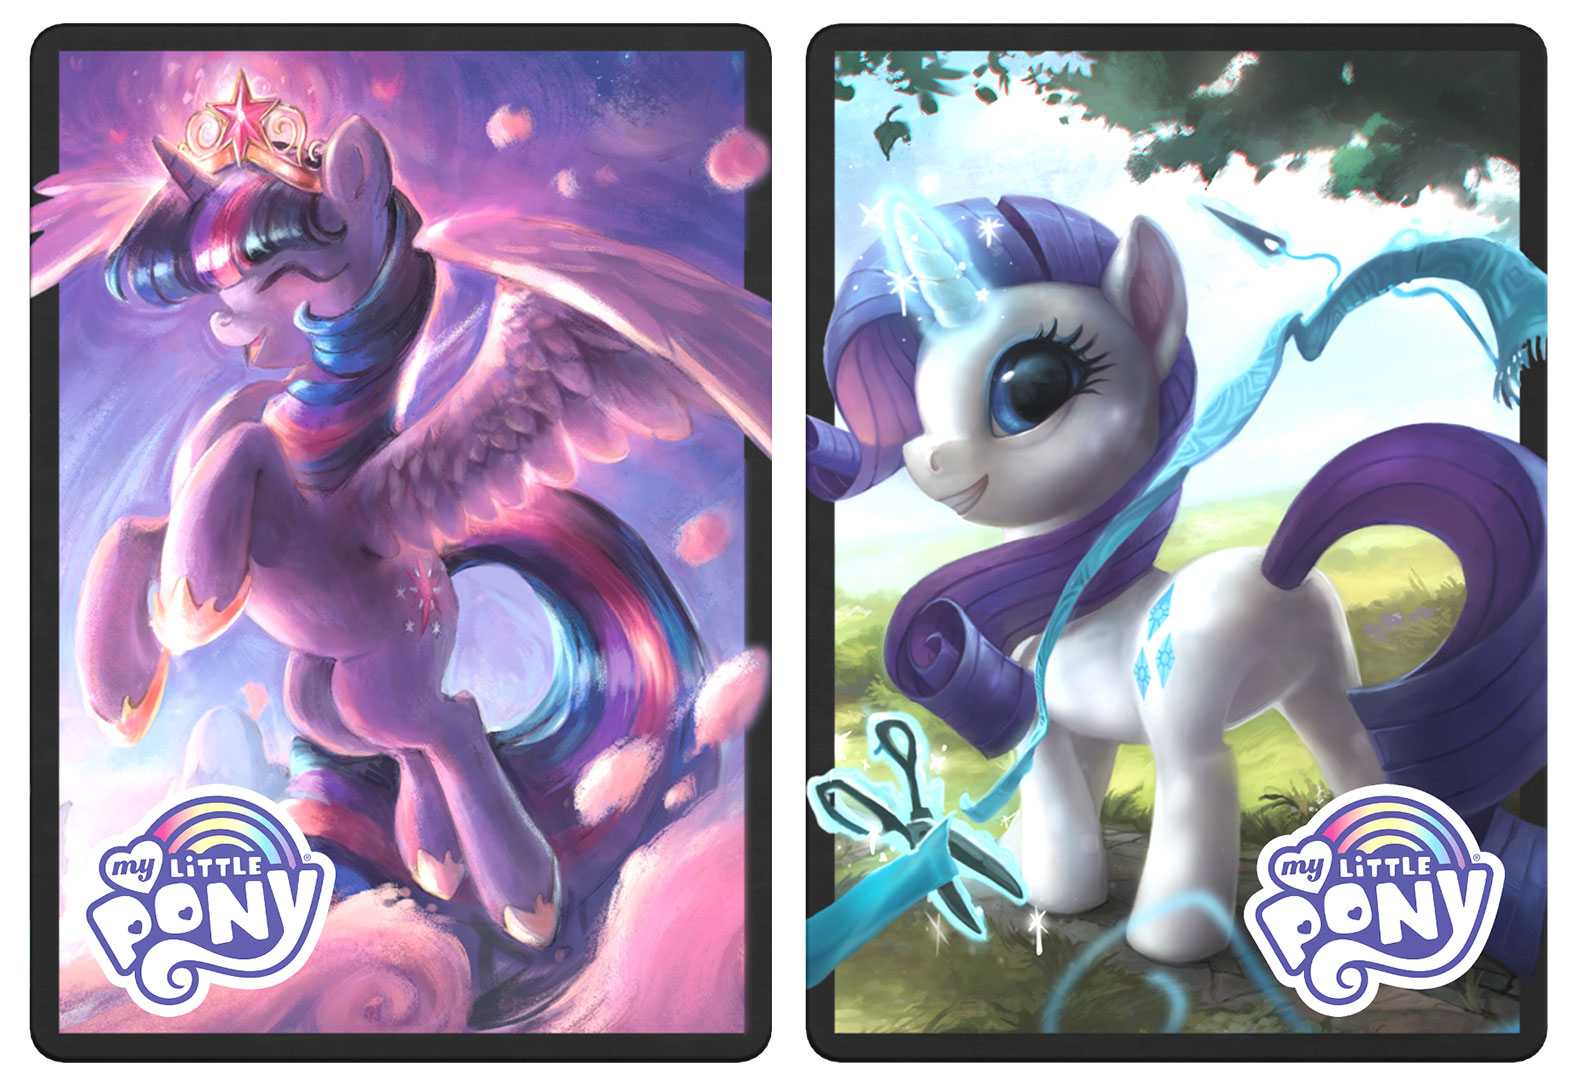 MTG My Little Pony crossover returns for charity - Dexerto